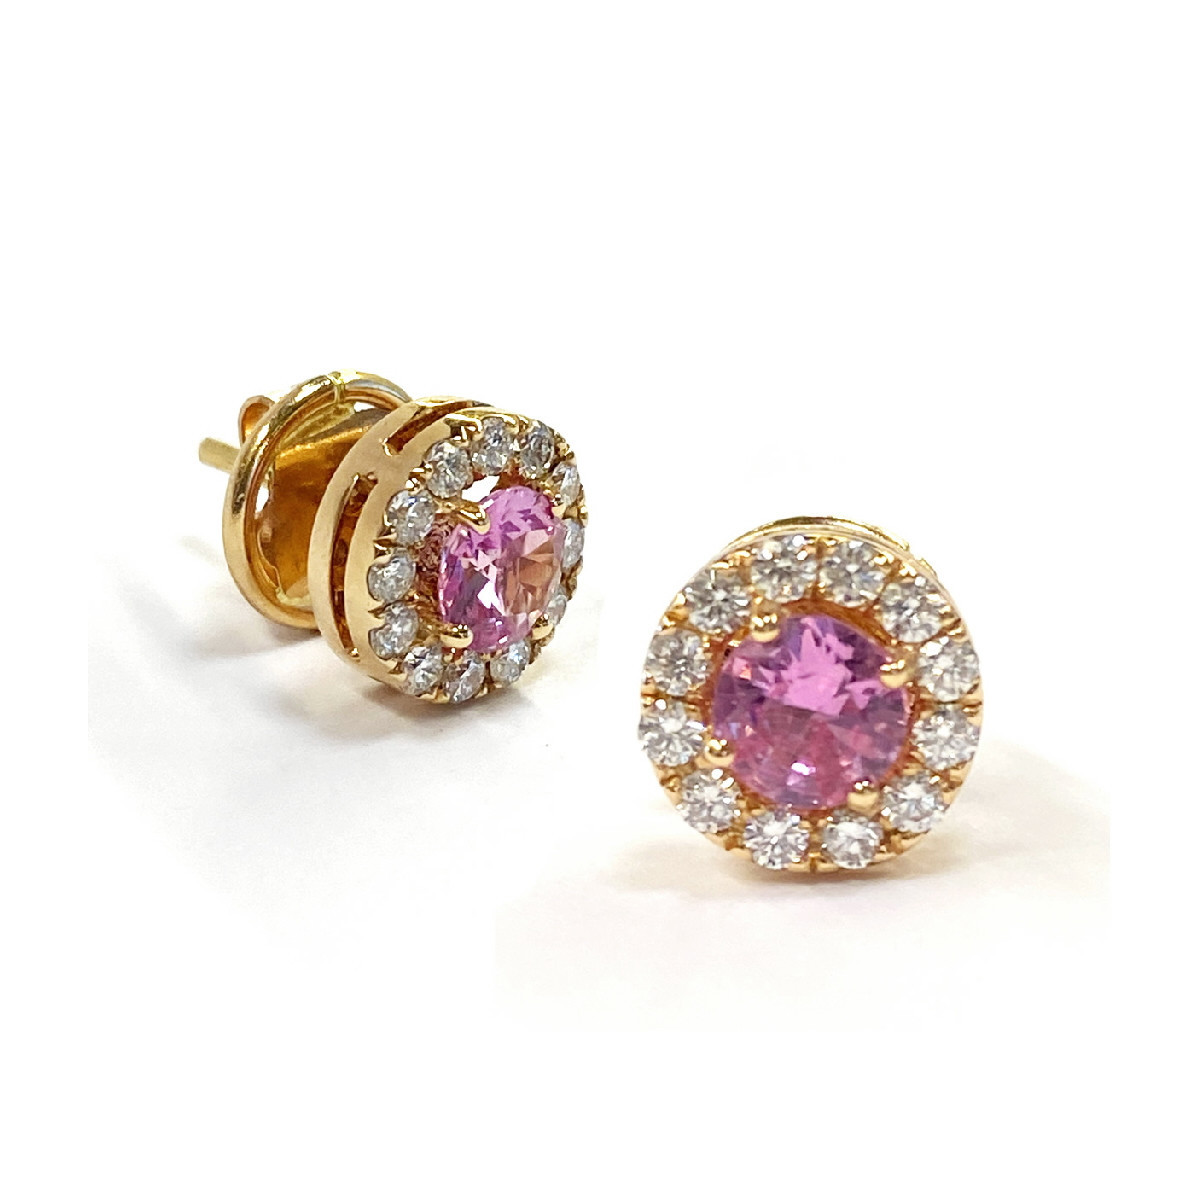 ROUND EARRINGS WITH DIAMONDS AND PINK SAPPHIRE.